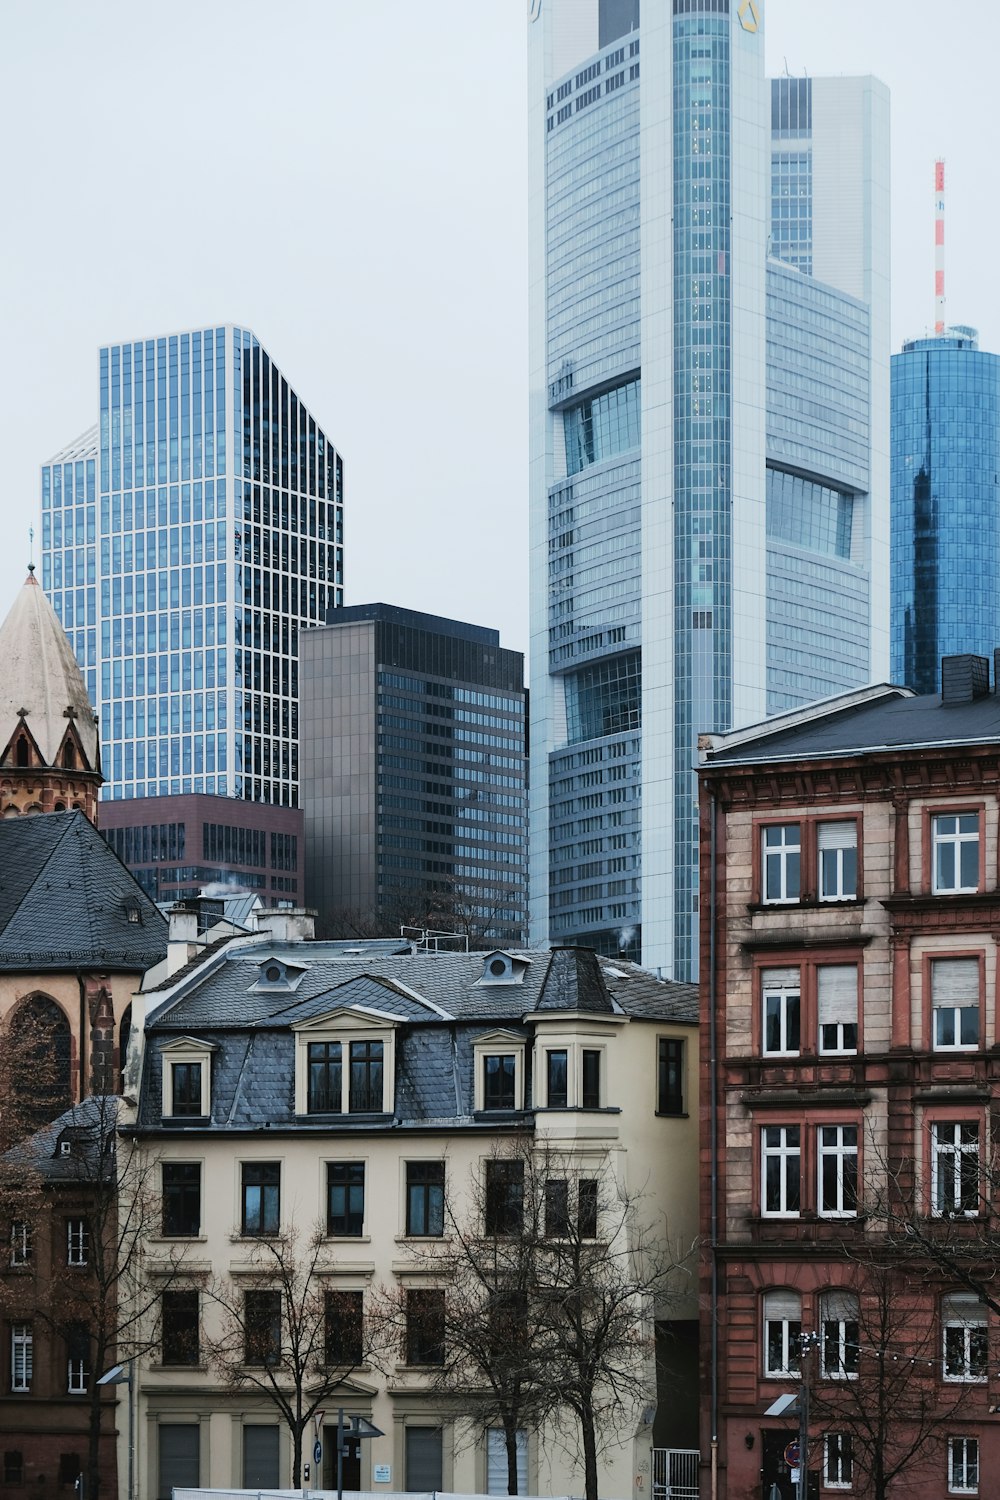 a group of buildings in a city with tall buildings